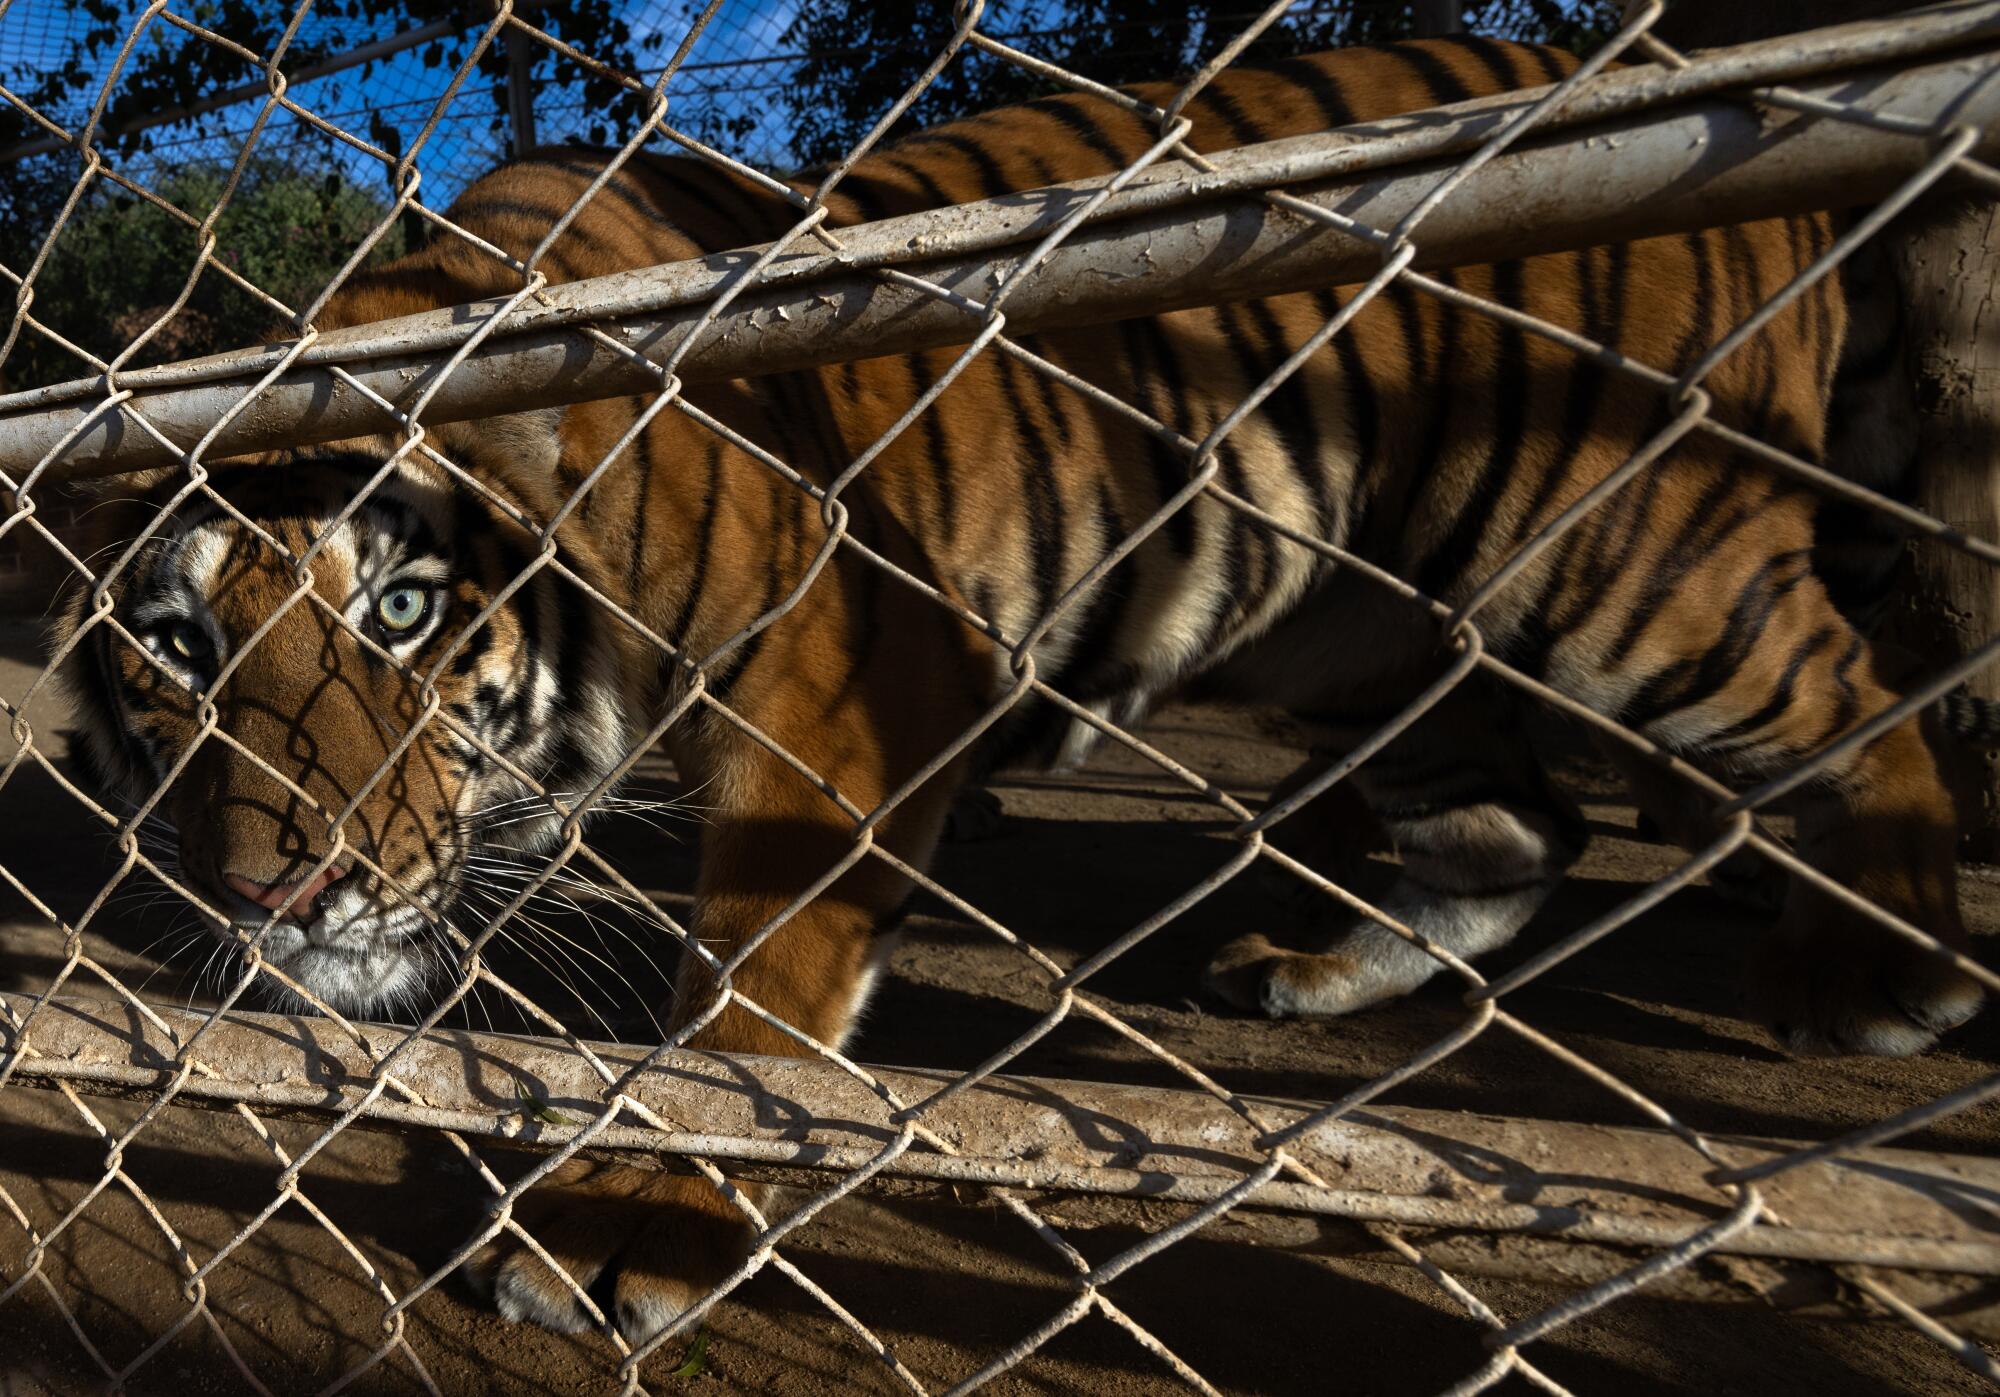 A tiger peers out of its cage.